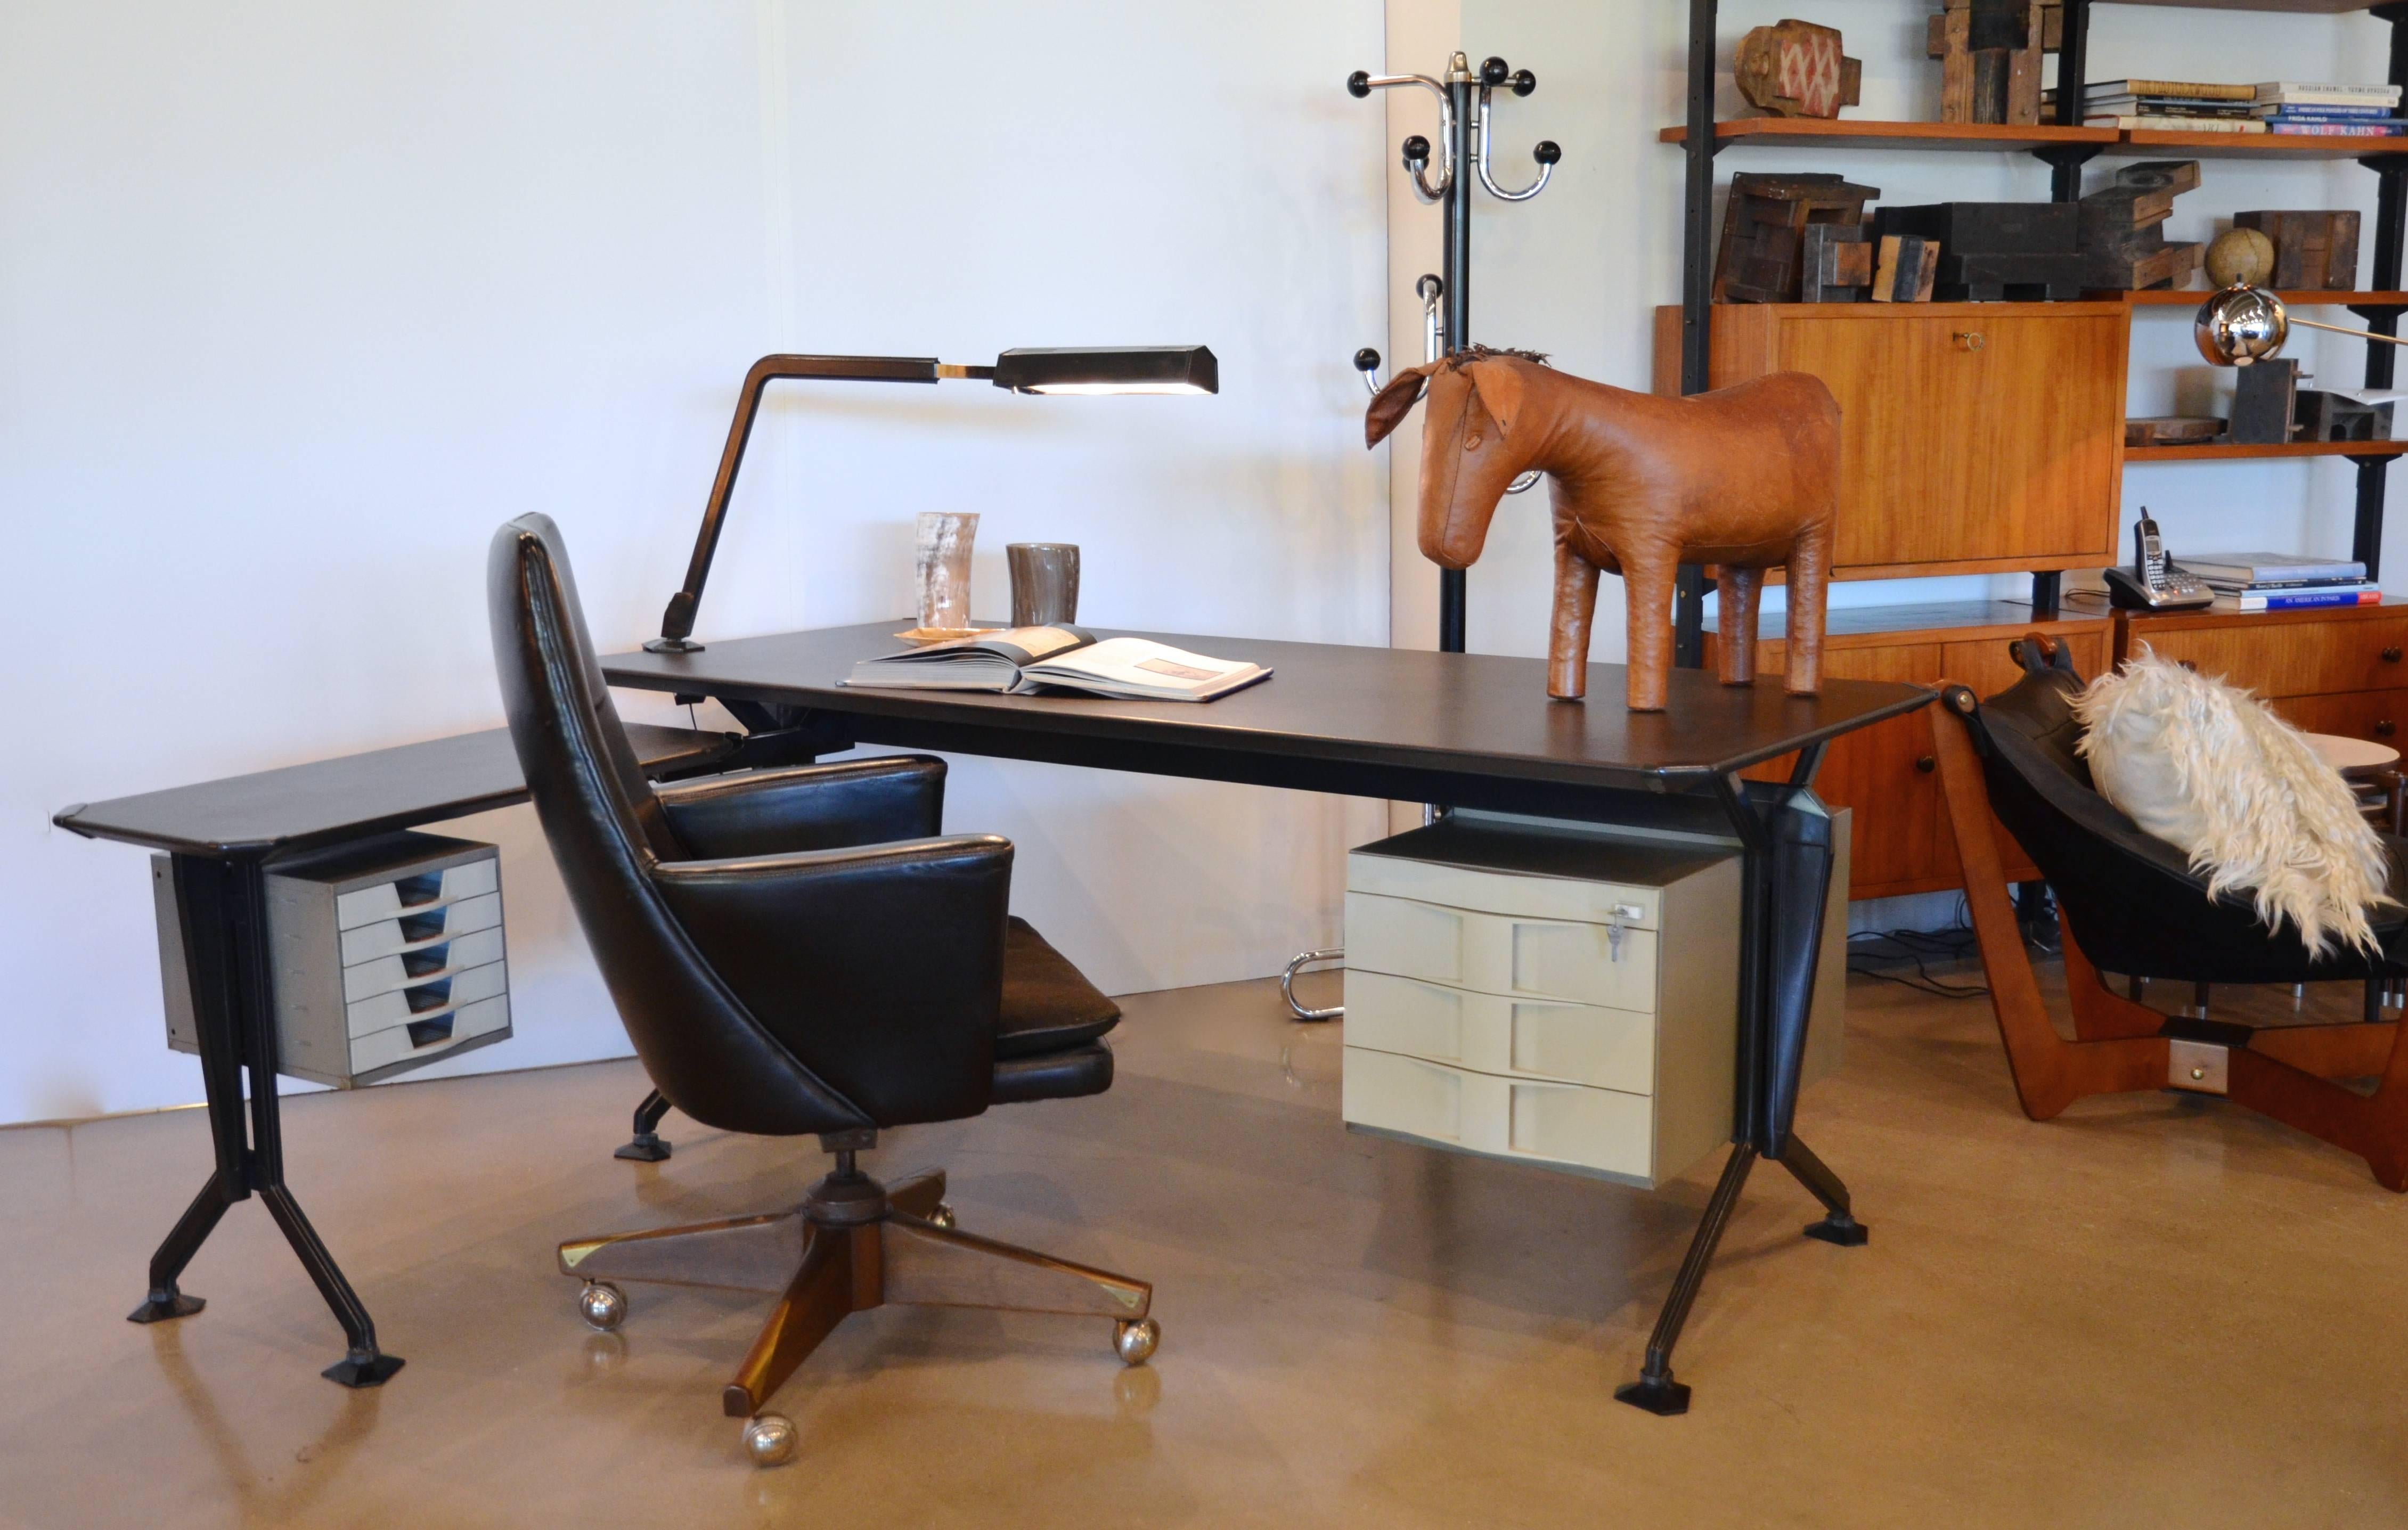 Unique and highly sought after Italian Mid-Century Modern 'Arco' writing desk and return with detachable lamp, 1963, design by Studio BBPR (Gianluigi Banfi, Lodovico Belgiojoso, Enrico Peressutti and Ernesto Rogers) for Olivetti. Desk top measures